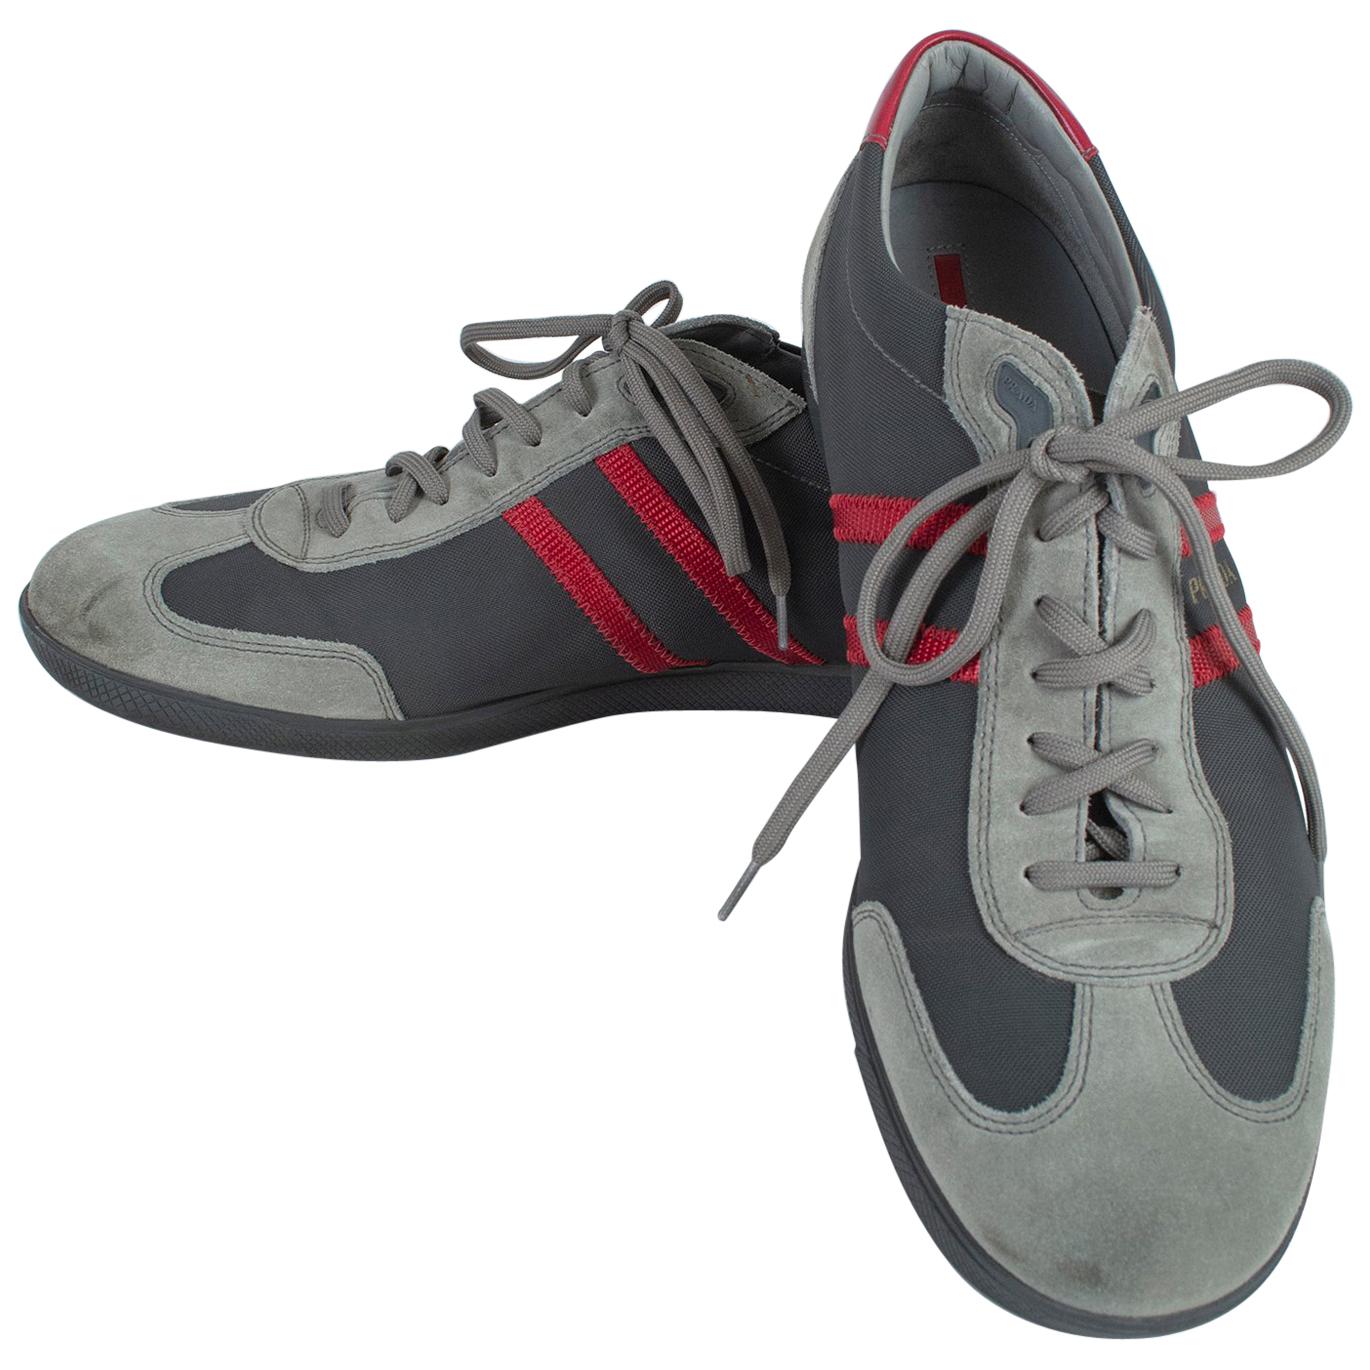 Men’s Prada Gray and Red Suede Sneaker Bowling Shoe, 21st Century